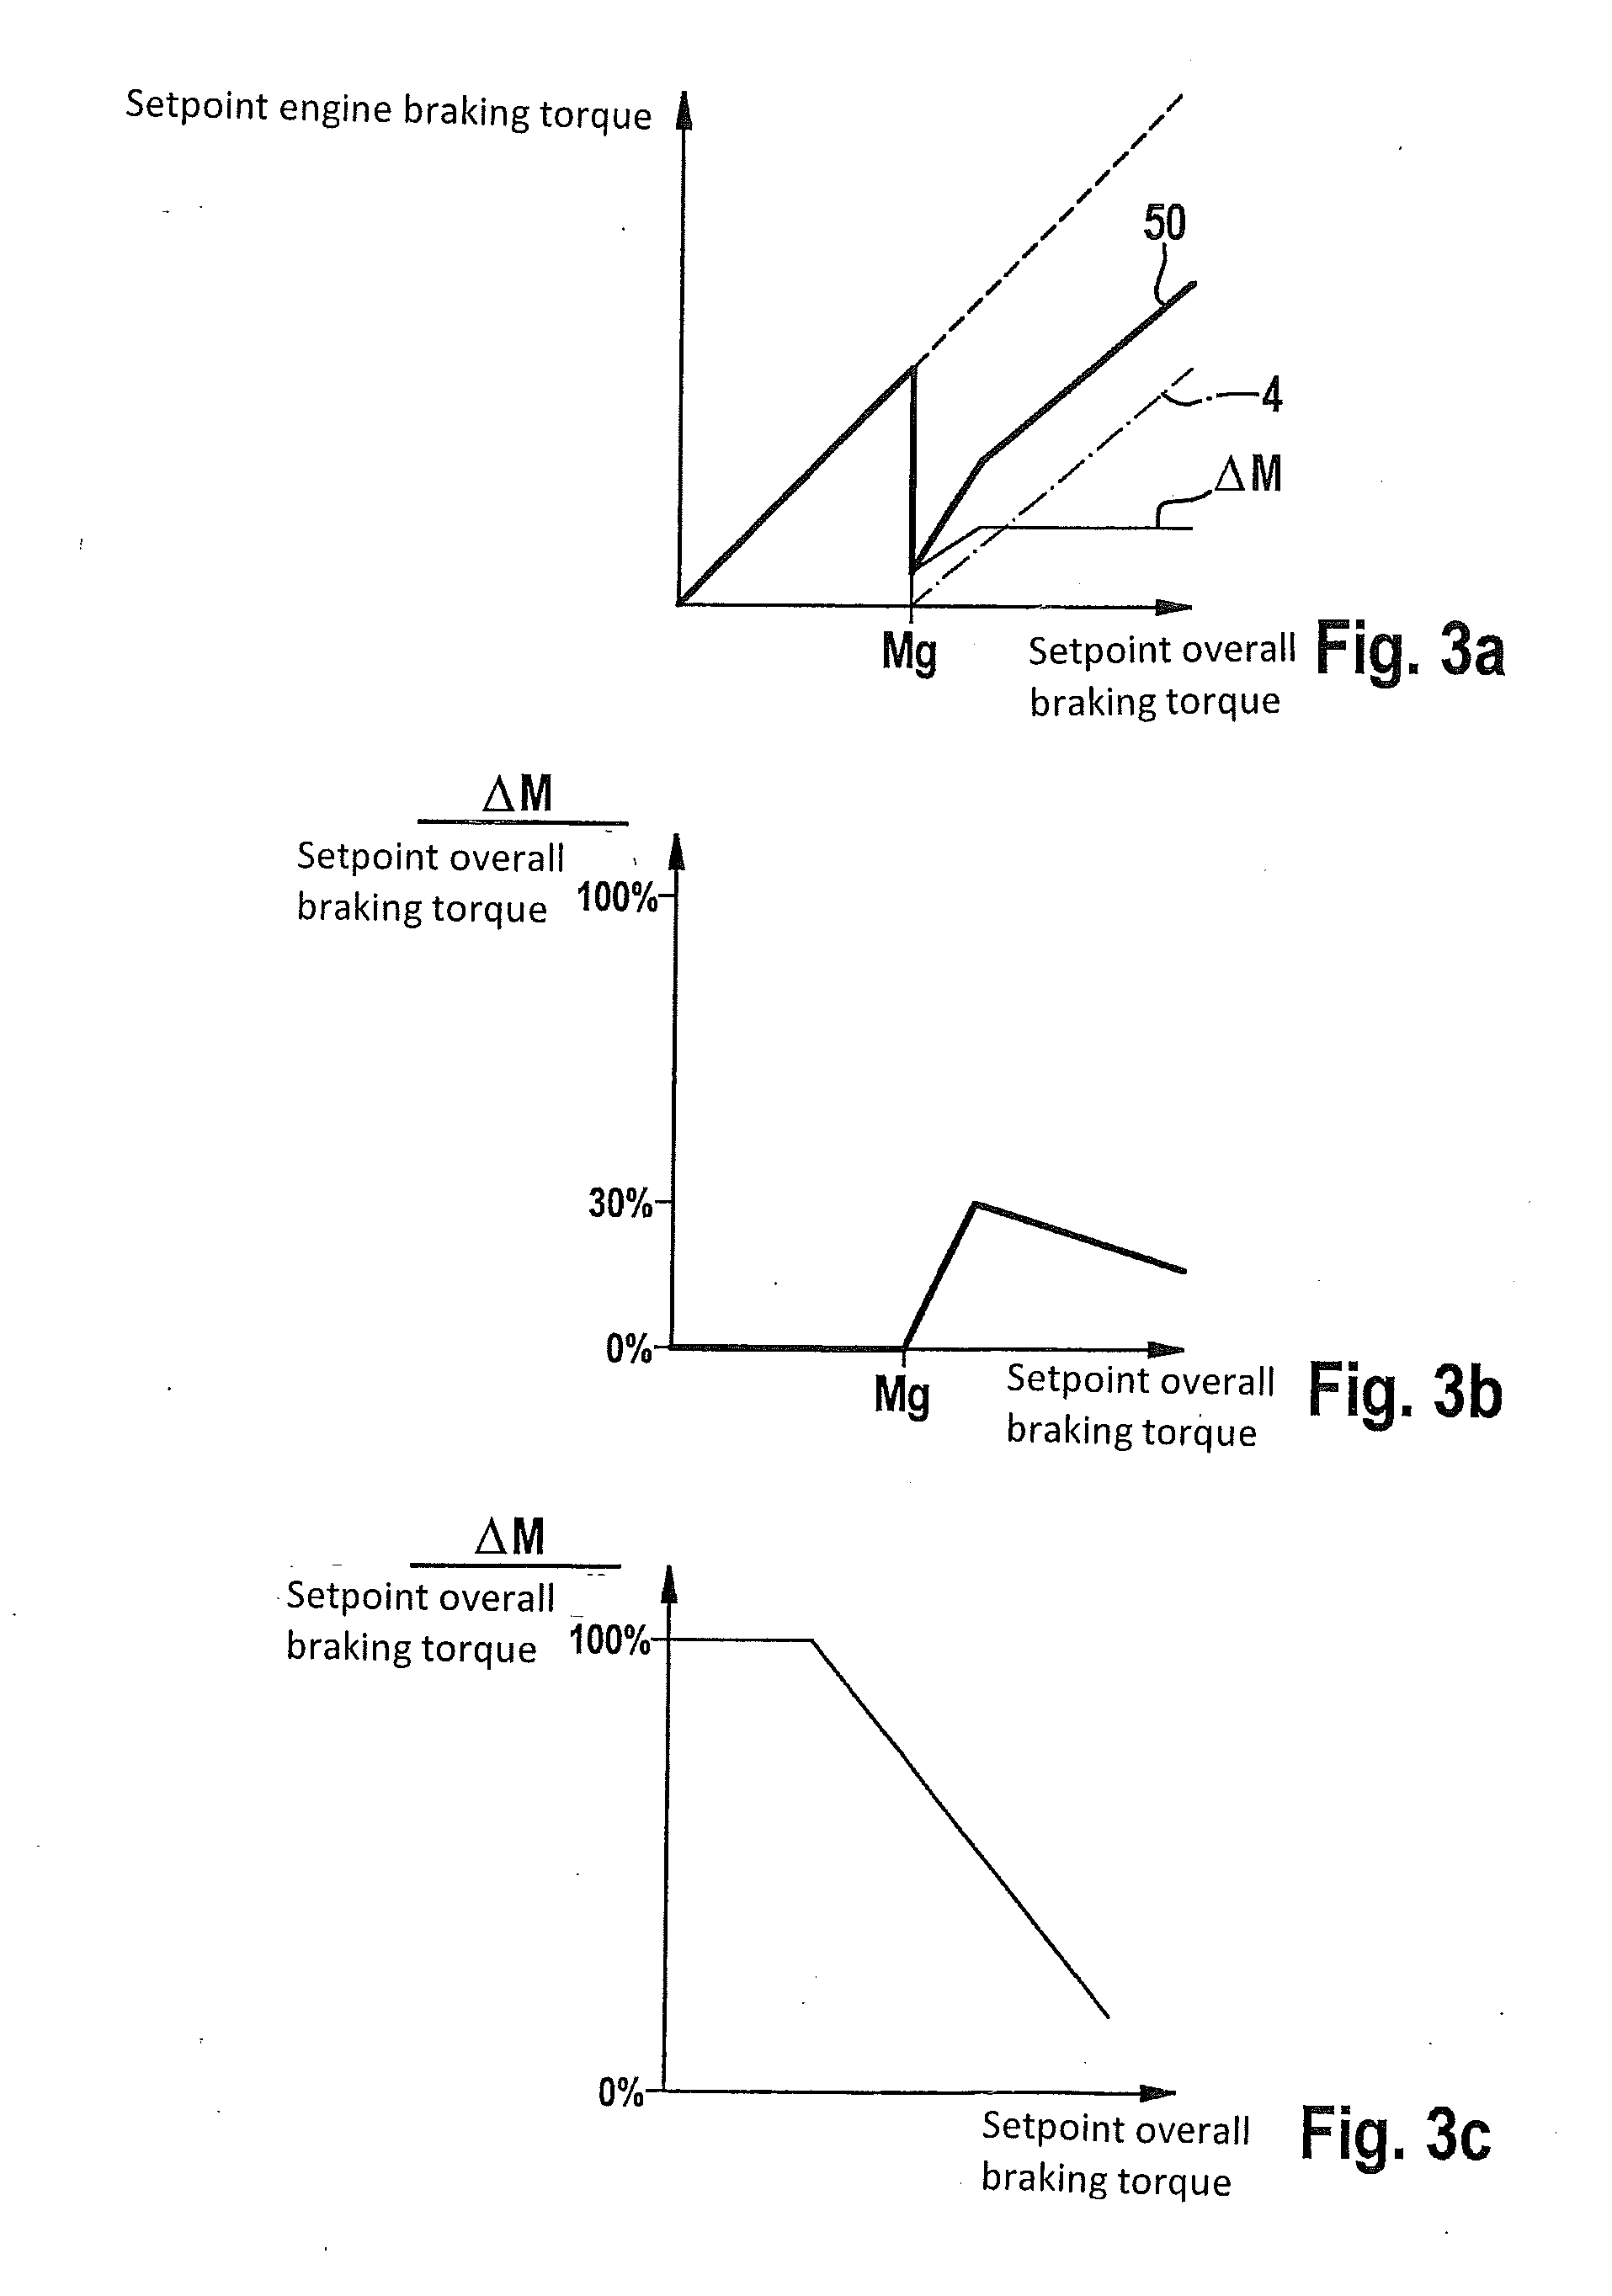 Control device for a regenerative braking system of a vehicle, and method for operating a regenerative braking system of a vehicle